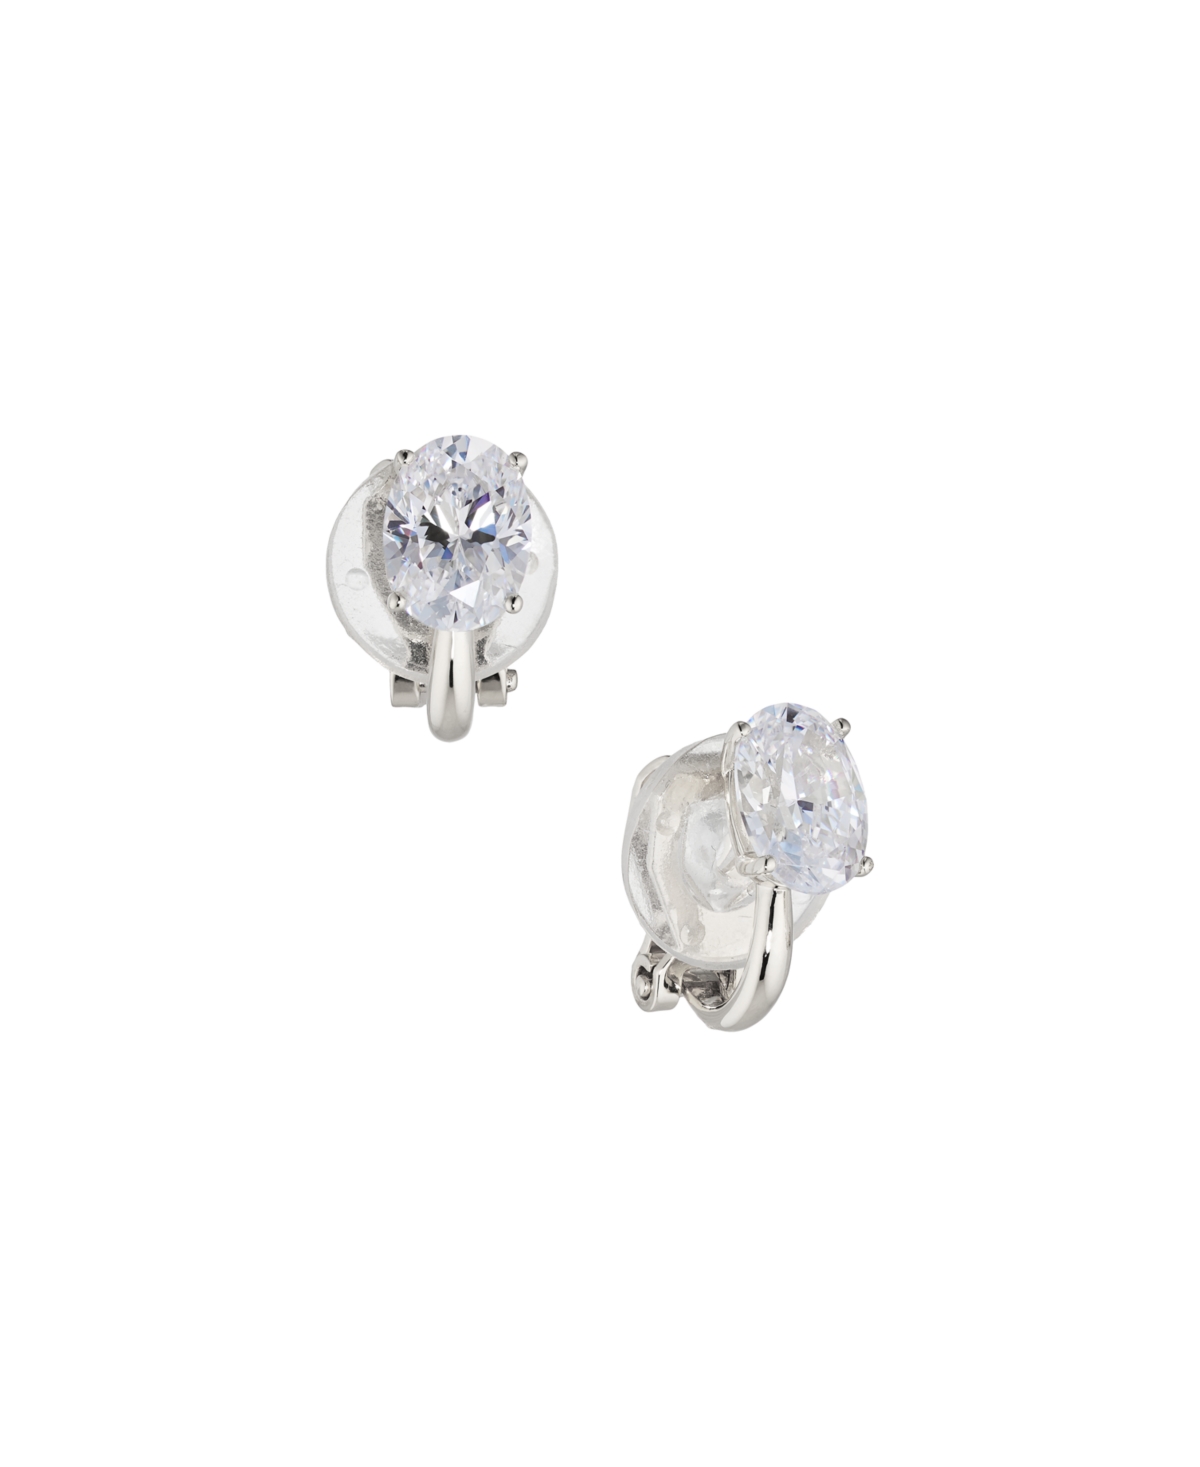 Rhodium Plated Clip Earrings, Created for Macy's - Rhodium Plated